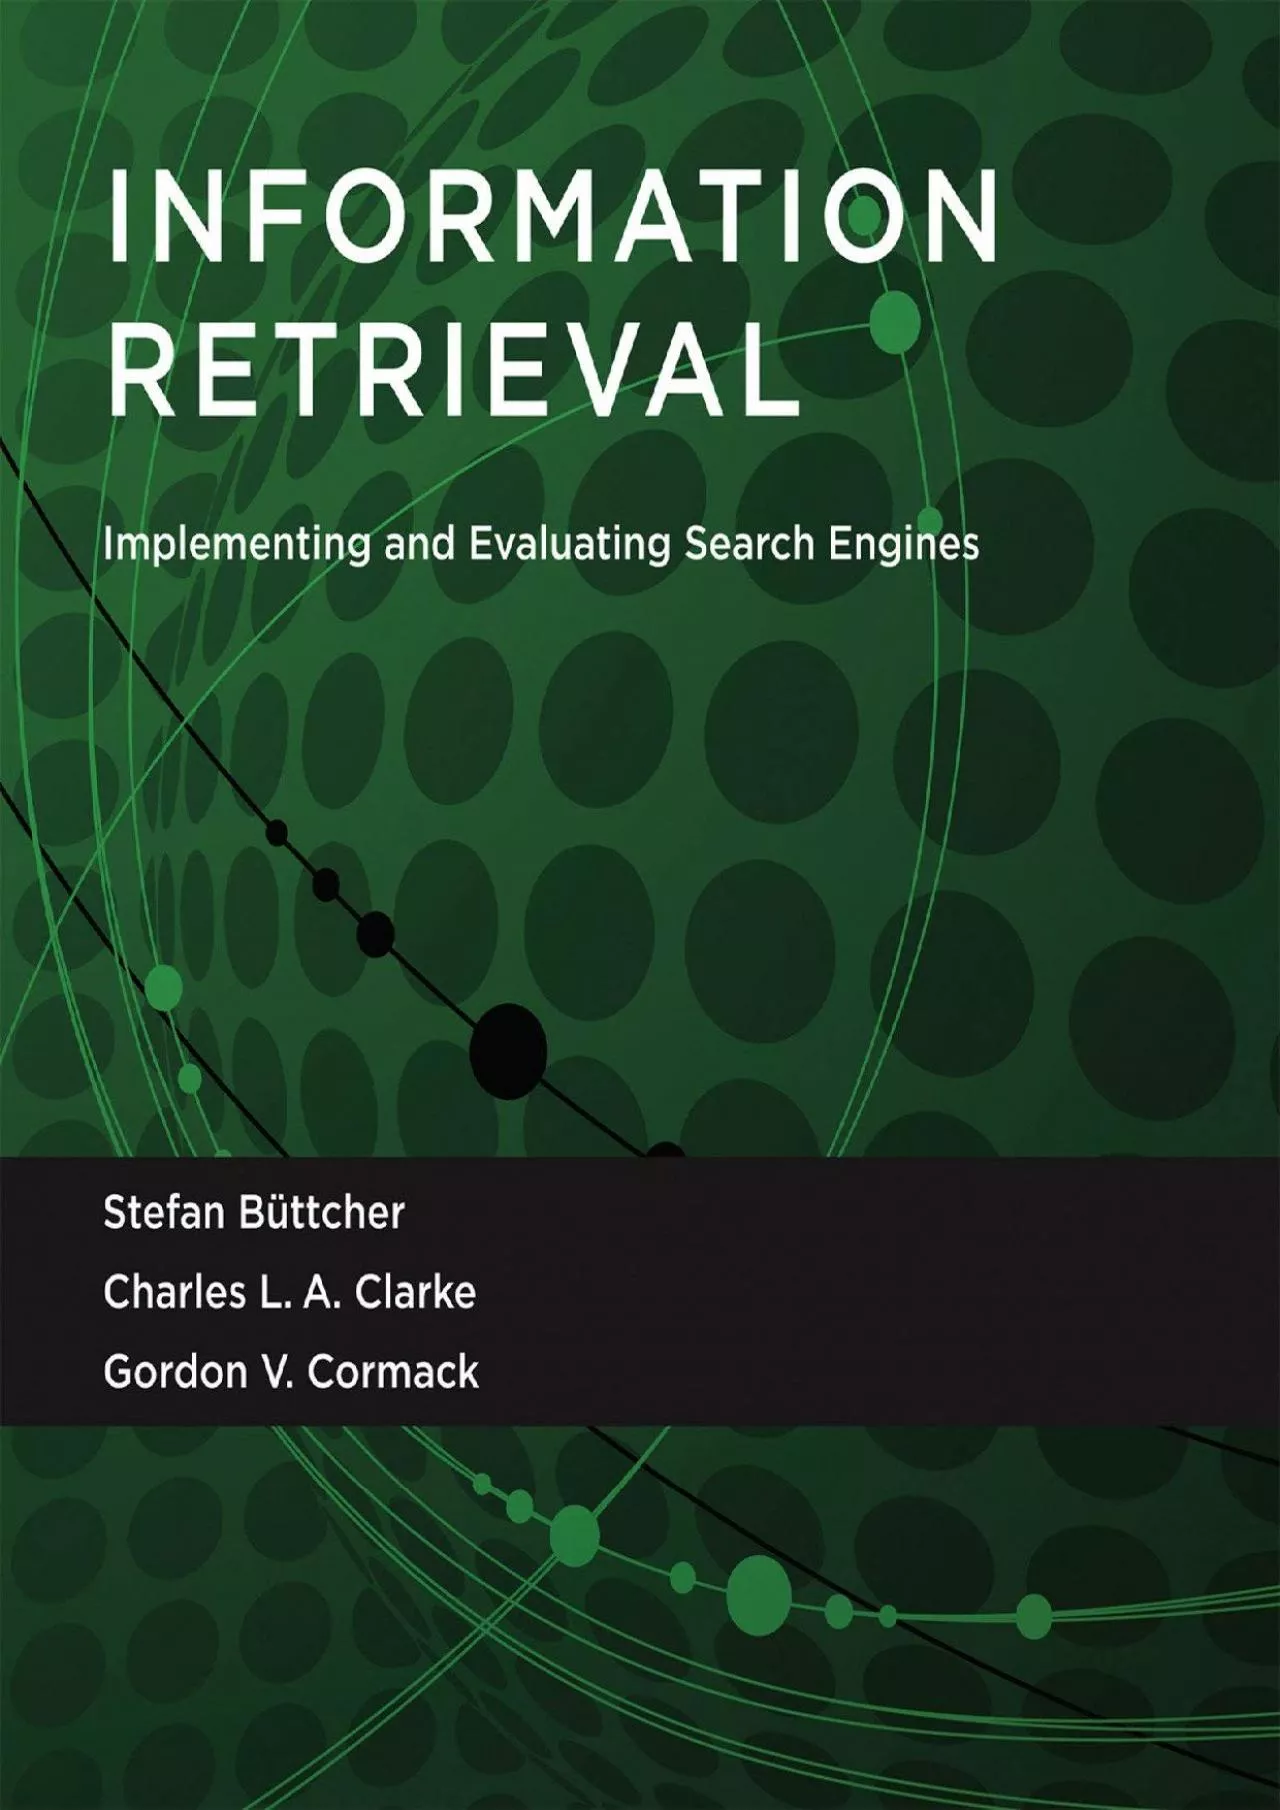 (DOWNLOAD)-Information Retrieval: Implementing and Evaluating Search Engines (The MIT